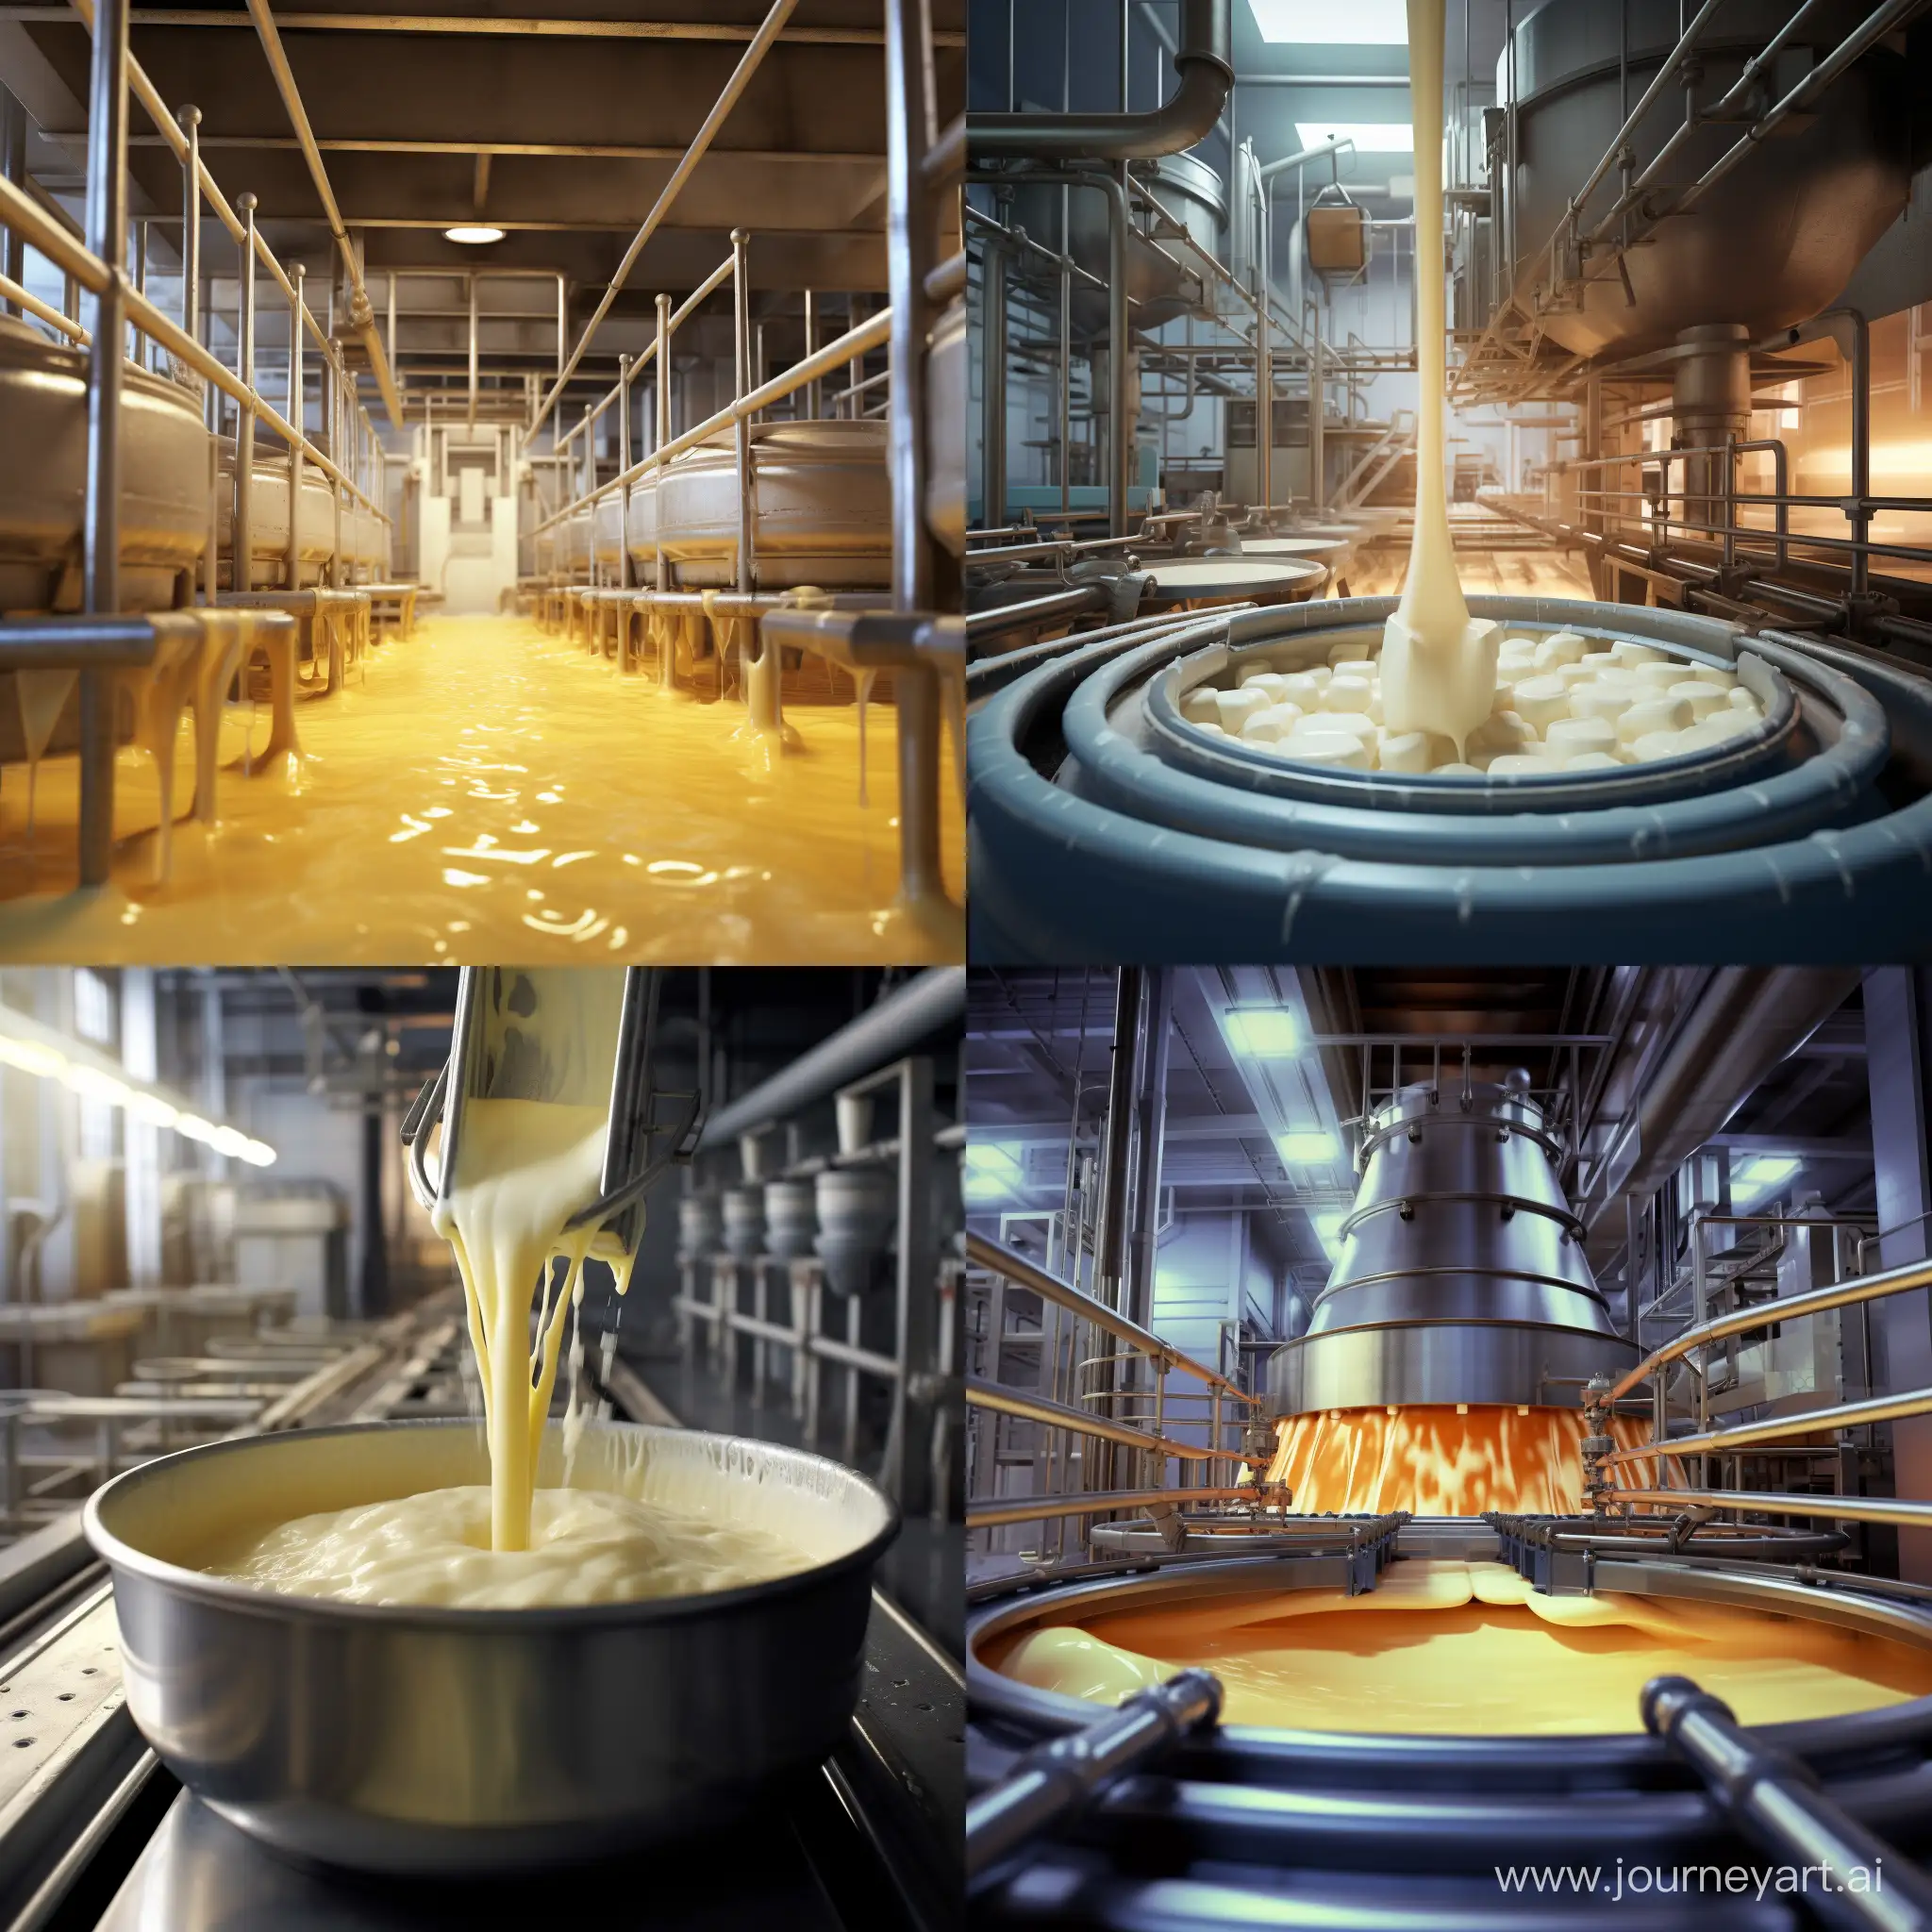 Artistic-MiniCheese-Factory-Captivating-Process-of-Sweetened-Condensed-Milk-Production